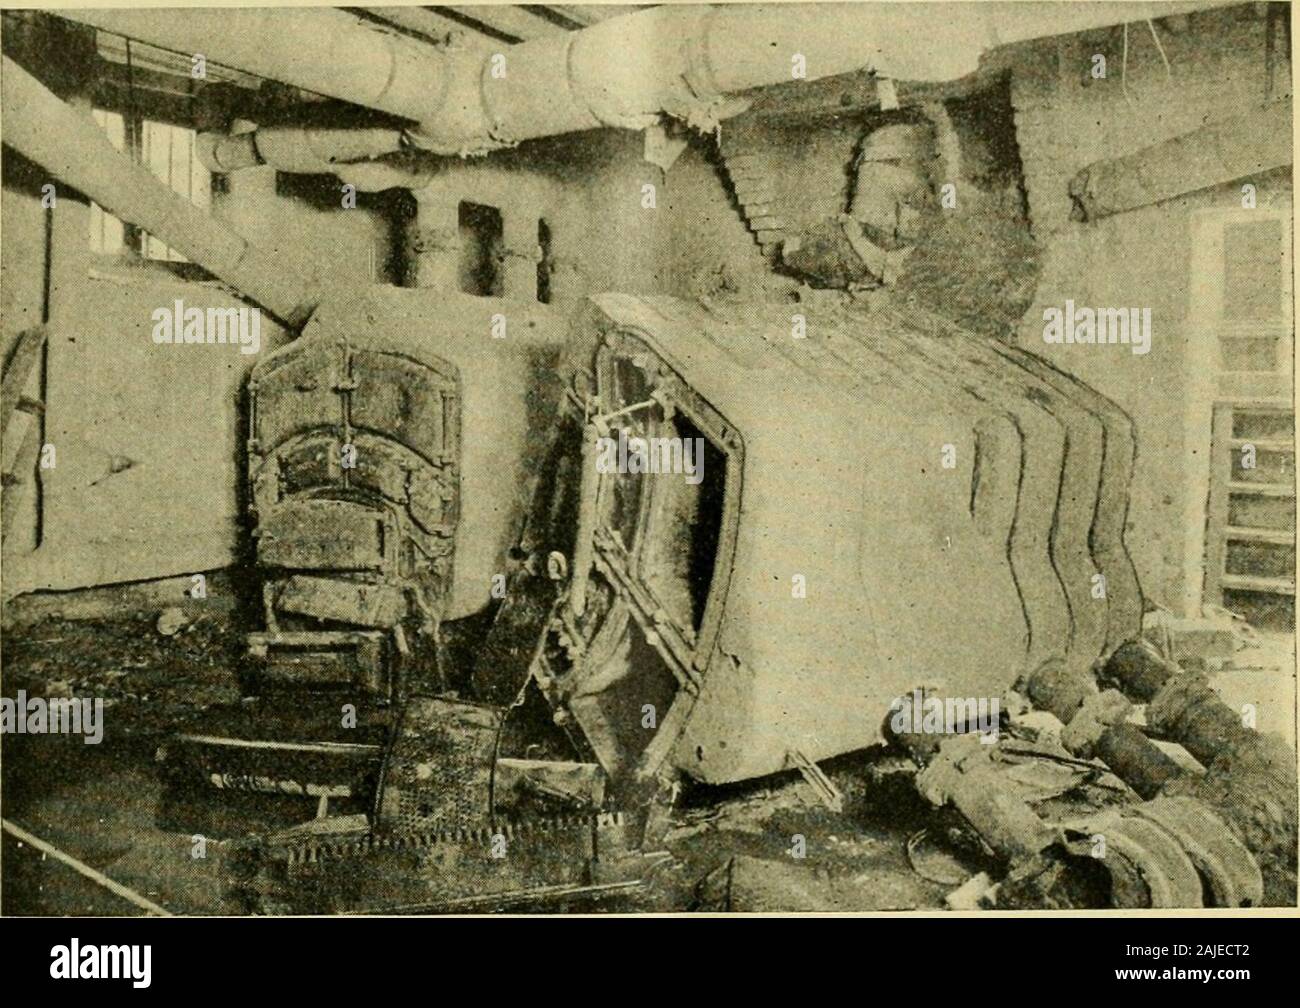 The Locomotive . nd dollars. Fig. 3 gives a general view of theruins, and Fig. 4 gives another view, showing a portion of the ruins on a largerscale. An explosion widely different in character from either of the preceding isillustrated in Fig. 5. The boiler that is here shown was made of cast-iron,and was used for heating purposes only. It was one of a nest of two, both ofwhich are seen in the illustration, although only one exploded. The boilers K)C7.] THE LOCOMOTIVE. 197 were located in the basement of St. Josephs Orphan Asylum, Seventh andSpruce streets, Philadelphia, Pa.; and as the buildi Stock Photo